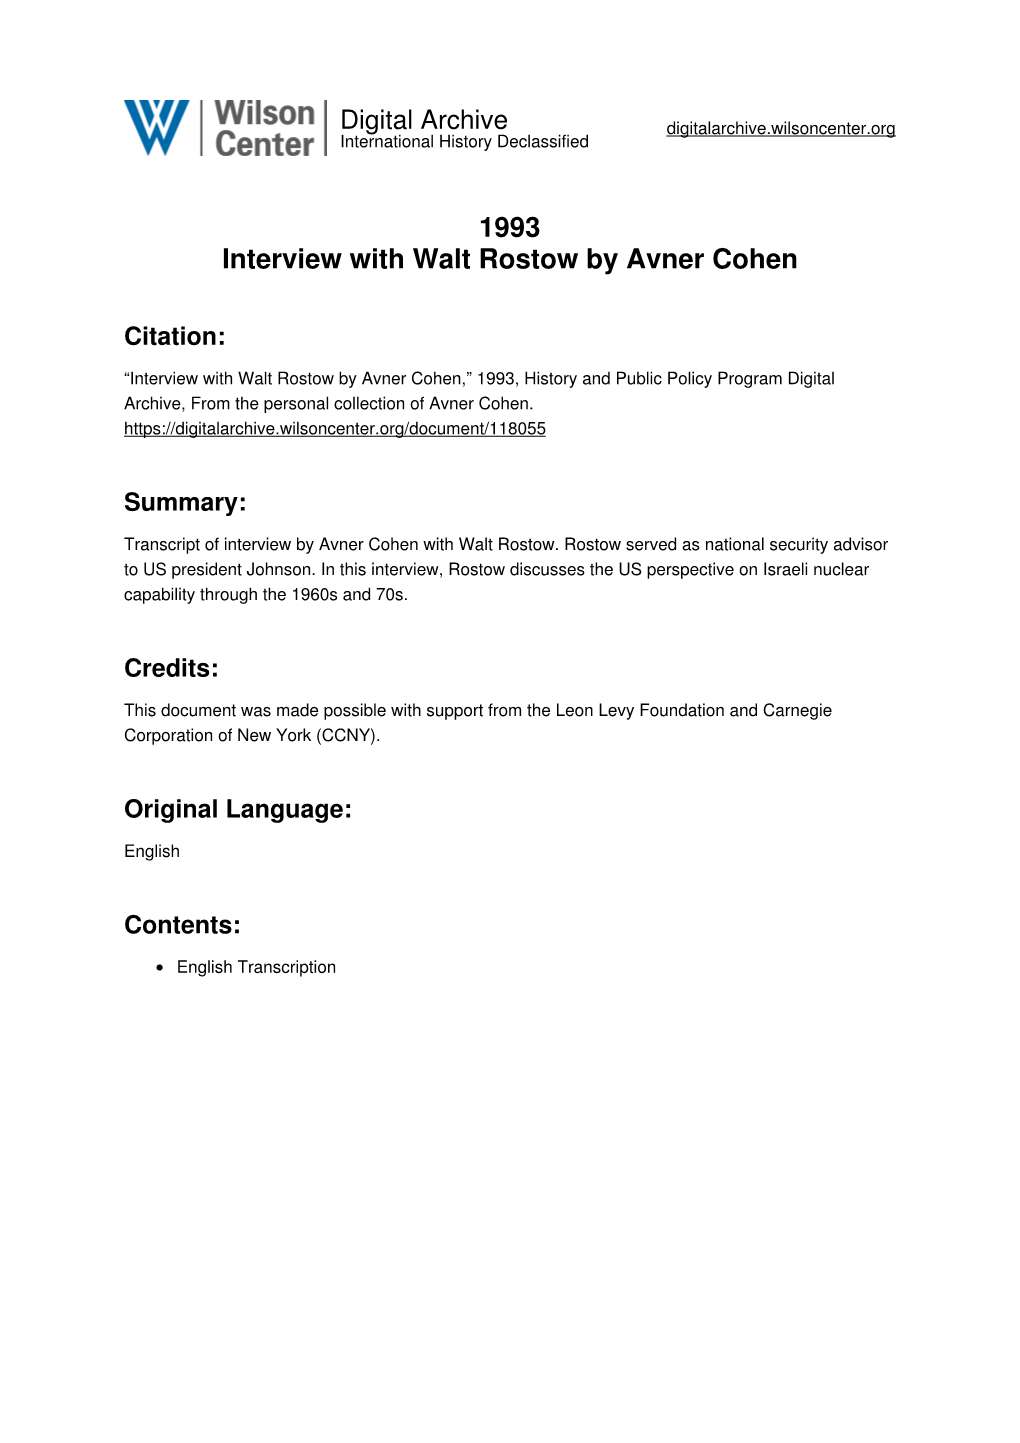 1993 Interview with Walt Rostow by Avner Cohen